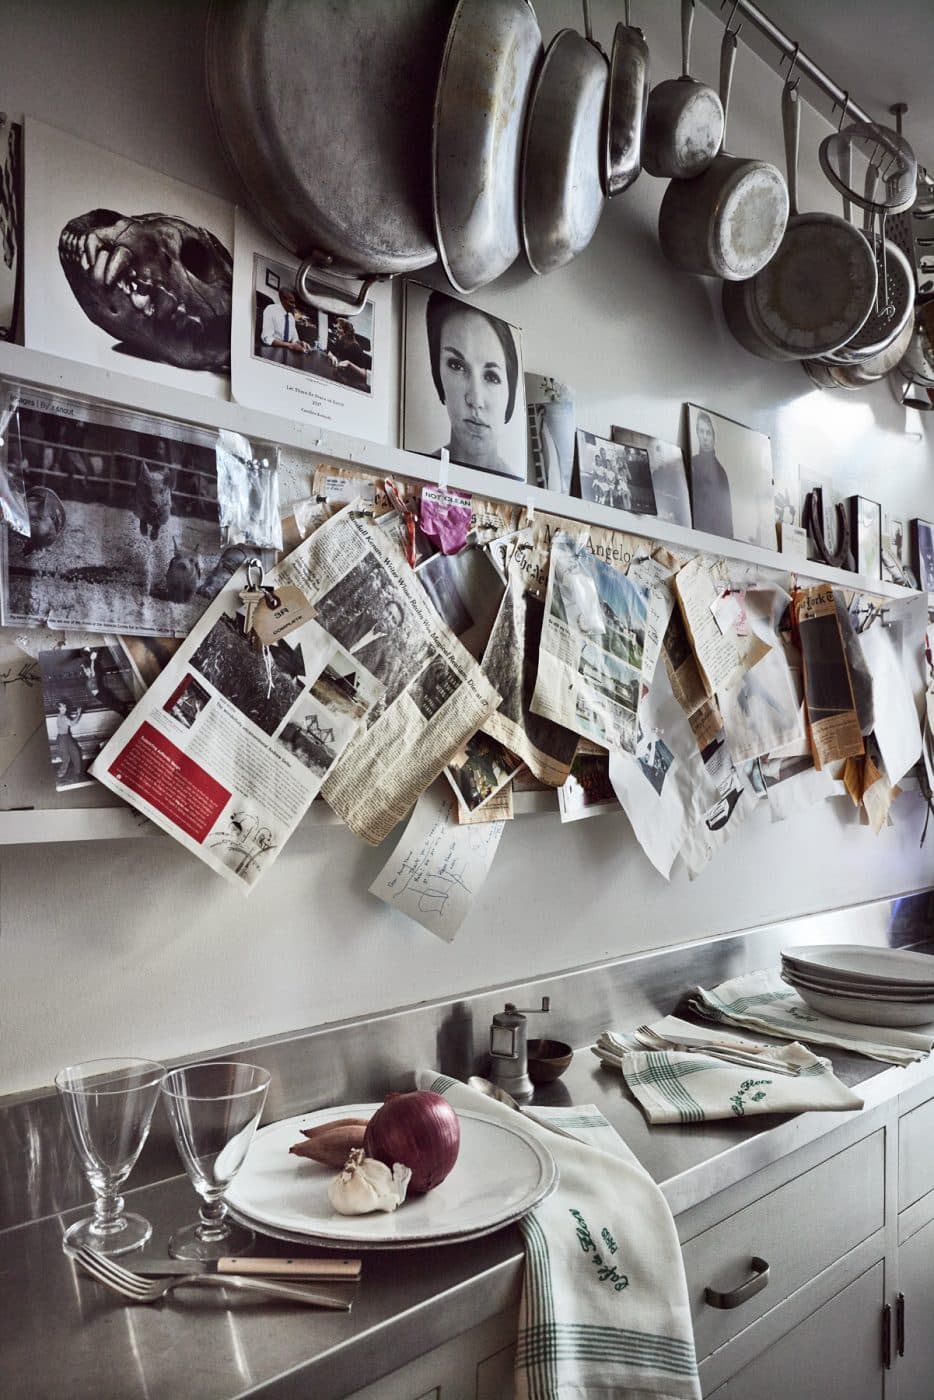 Kitchen area featuring hanging newspaper clips, black and white photography, and pots and pans